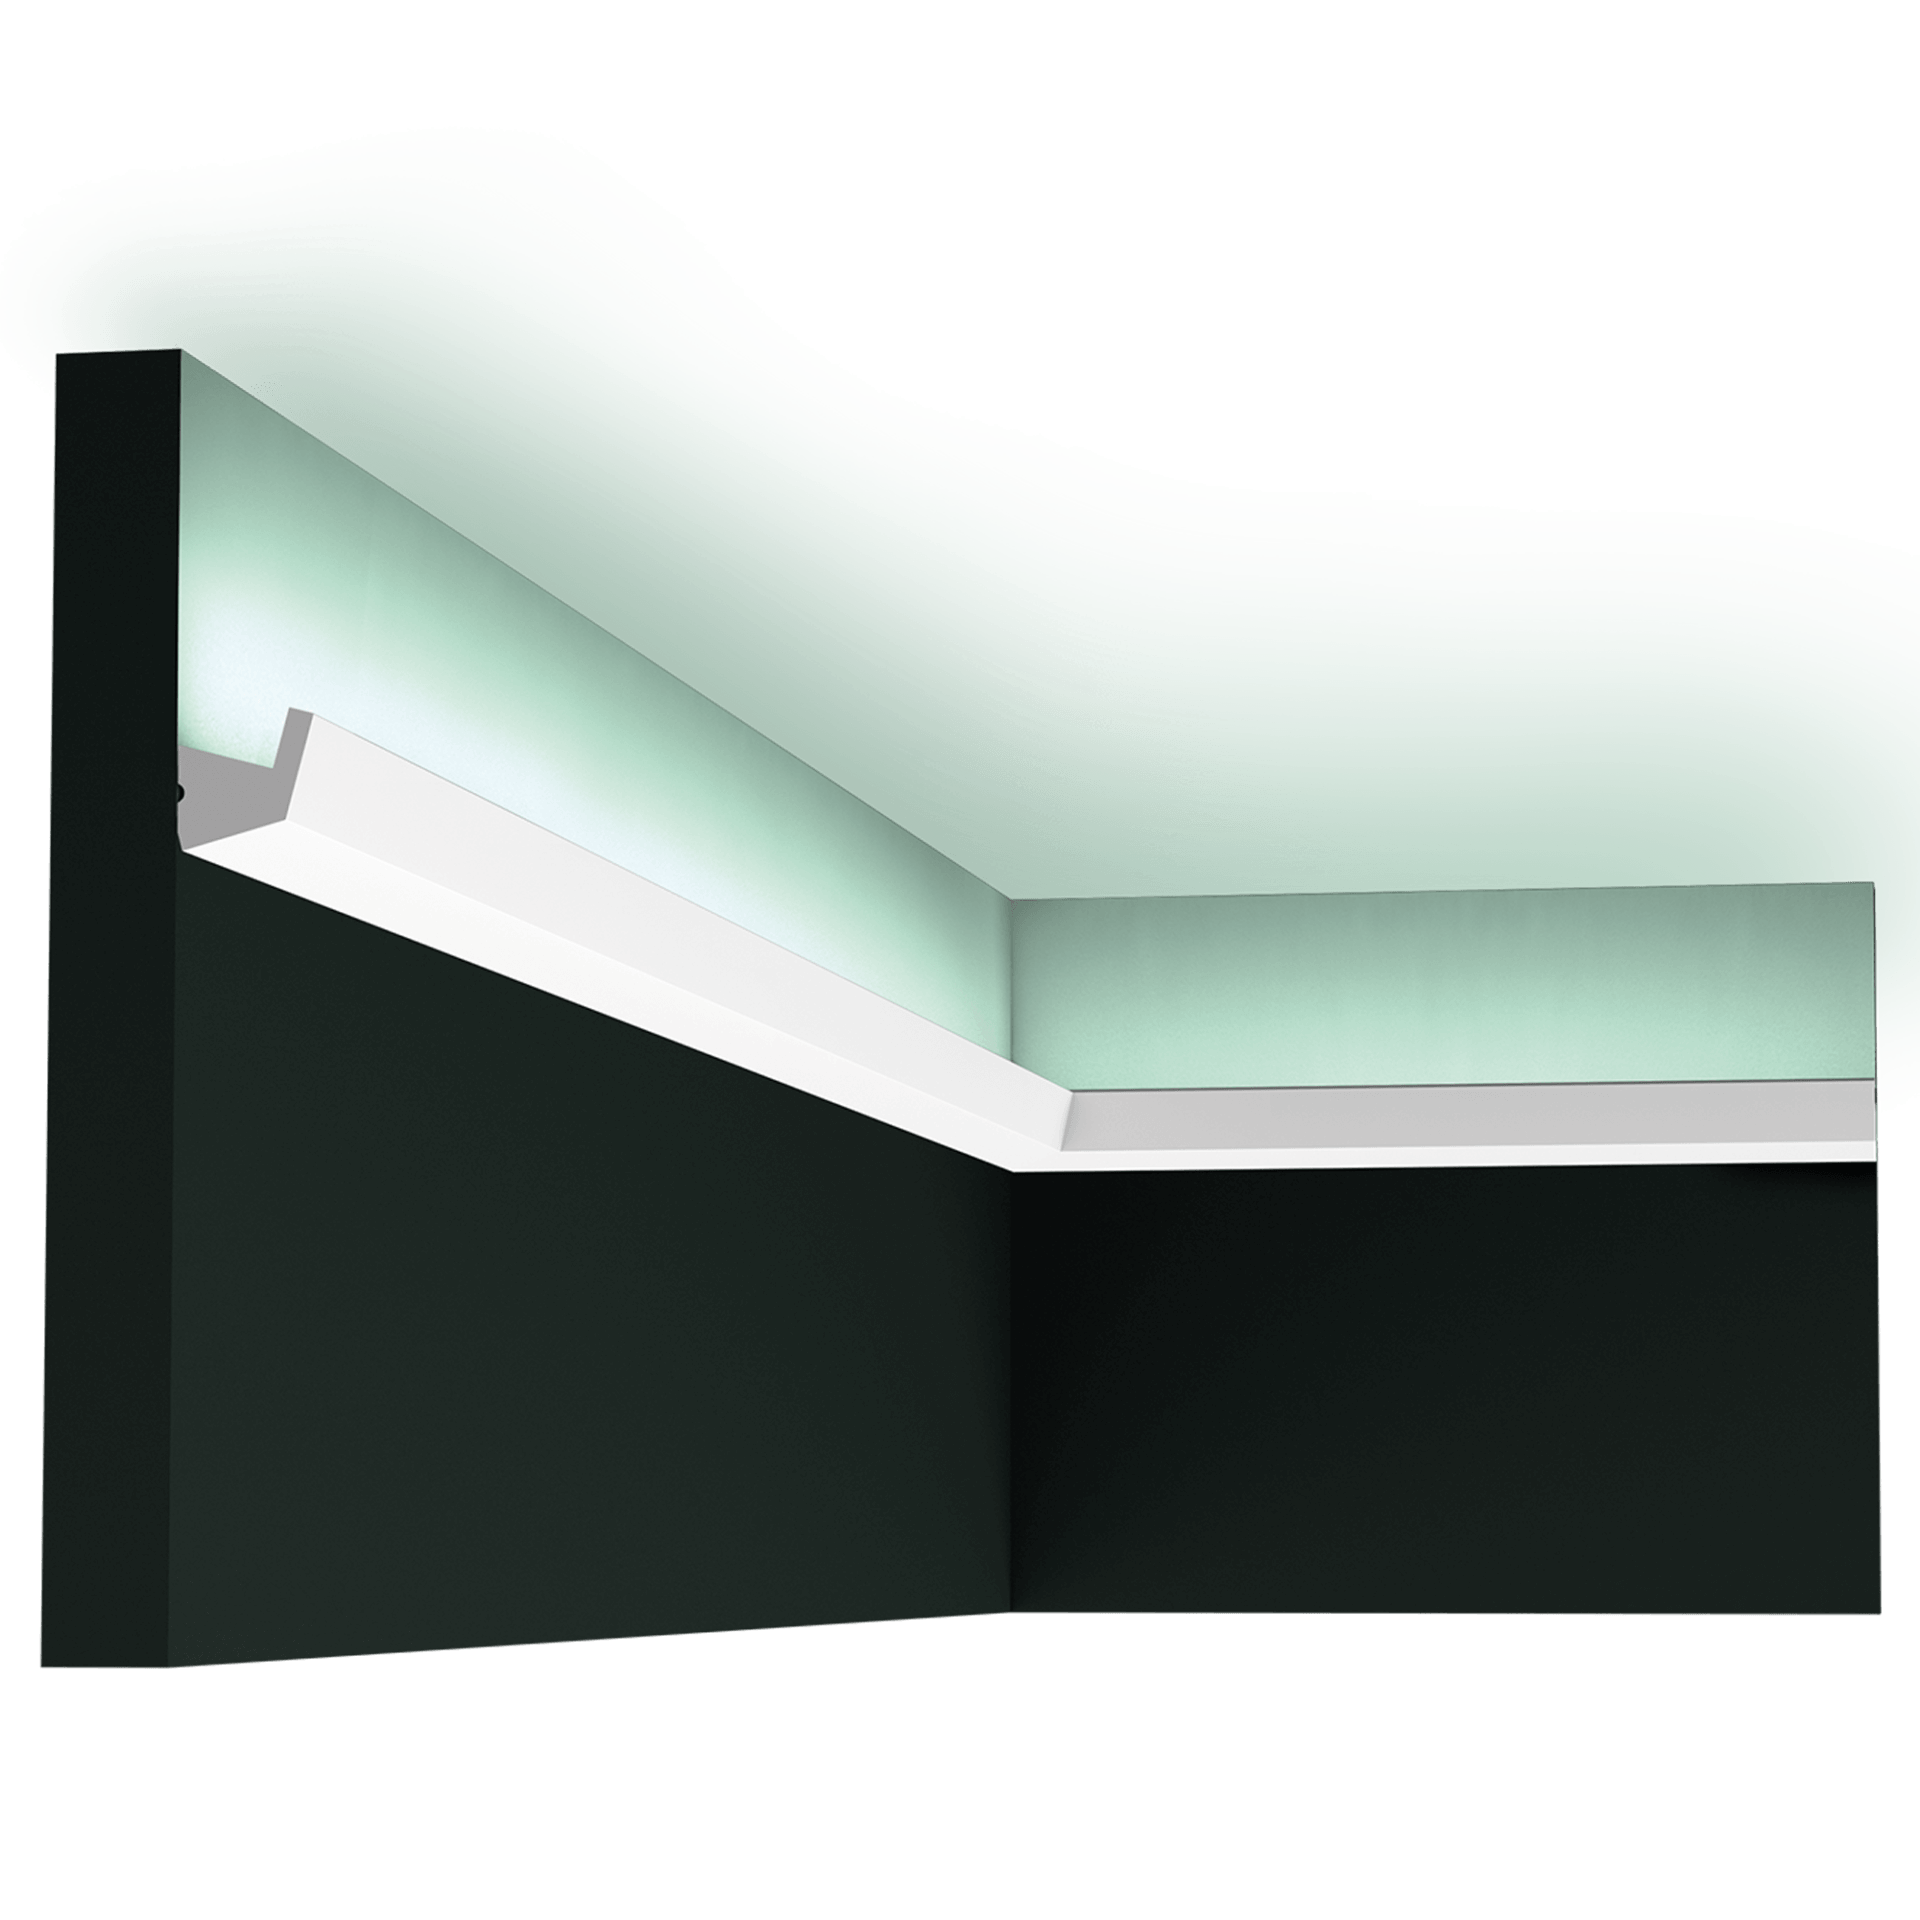 Compact angular design profile for indirect LED lighting. The subtle shadow line adds to the lighting's ambience. Designed by Orio Tonini. Installation remark: use an aluminum tape on the inside of the profile, or an aluminum LED support to avoid the light showing through the moulding.